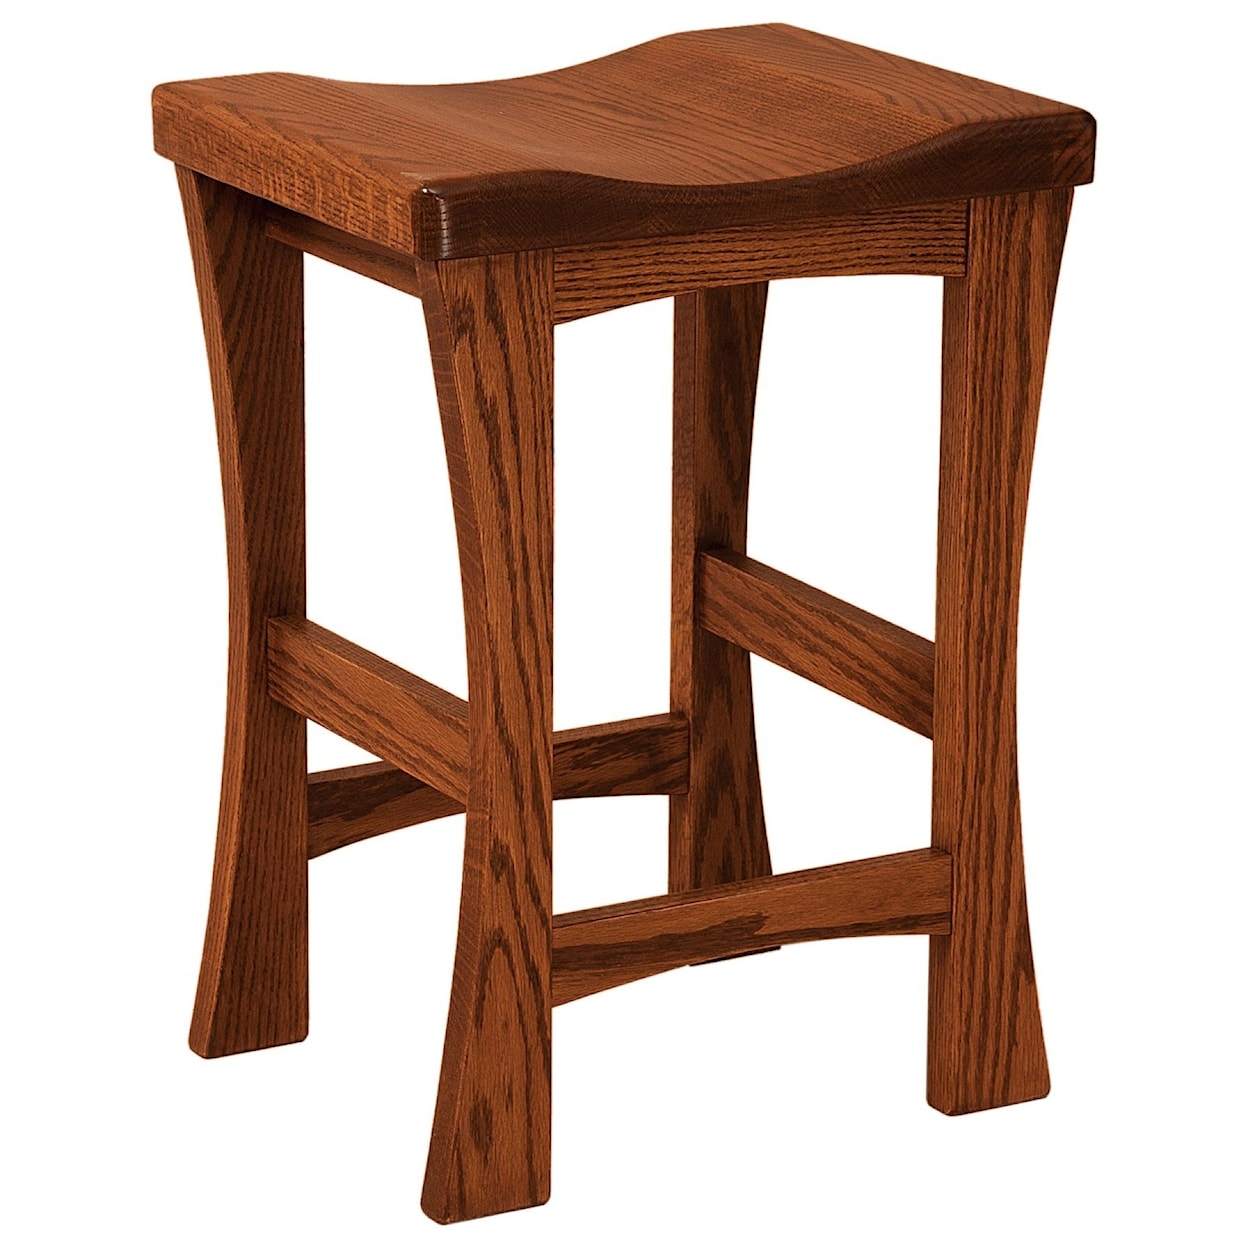 F&N Woodworking Kalston 30" Height Bar Stool - Leather Seat